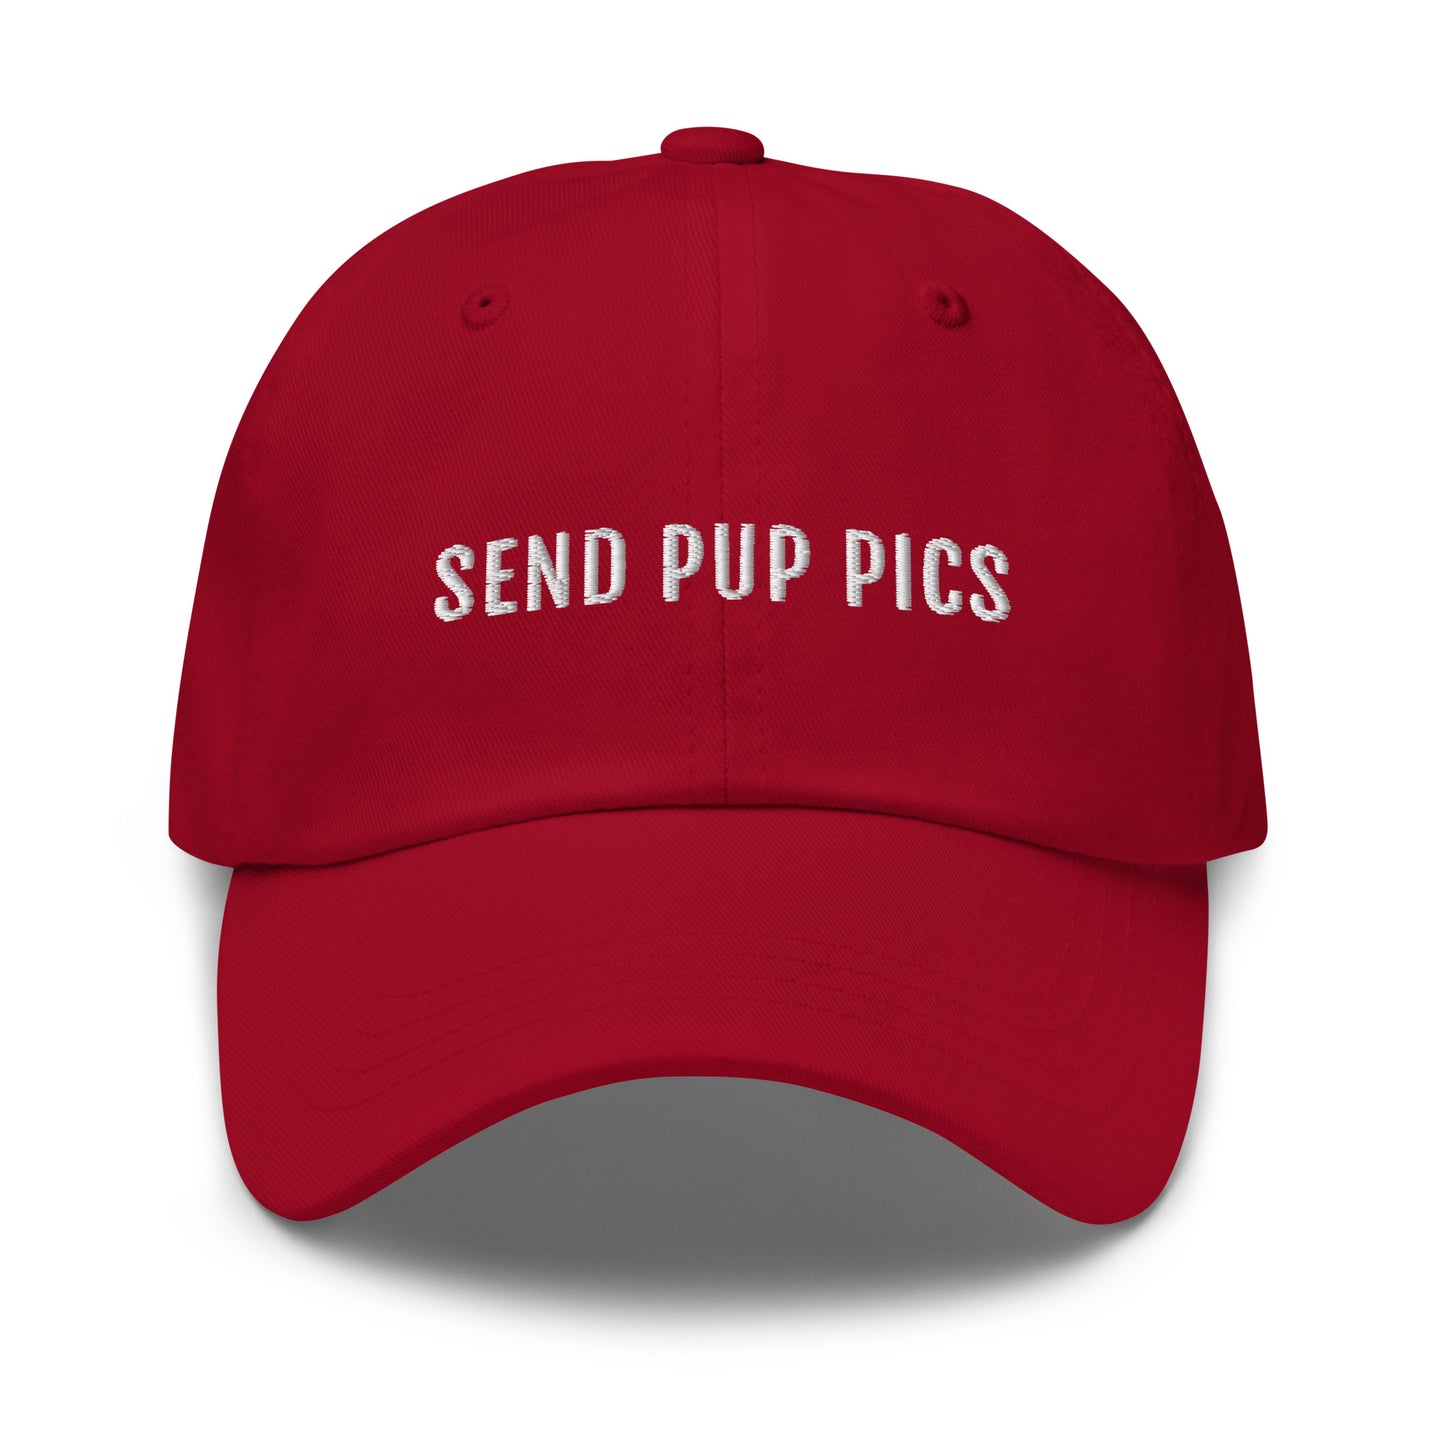 send pup pics red hat